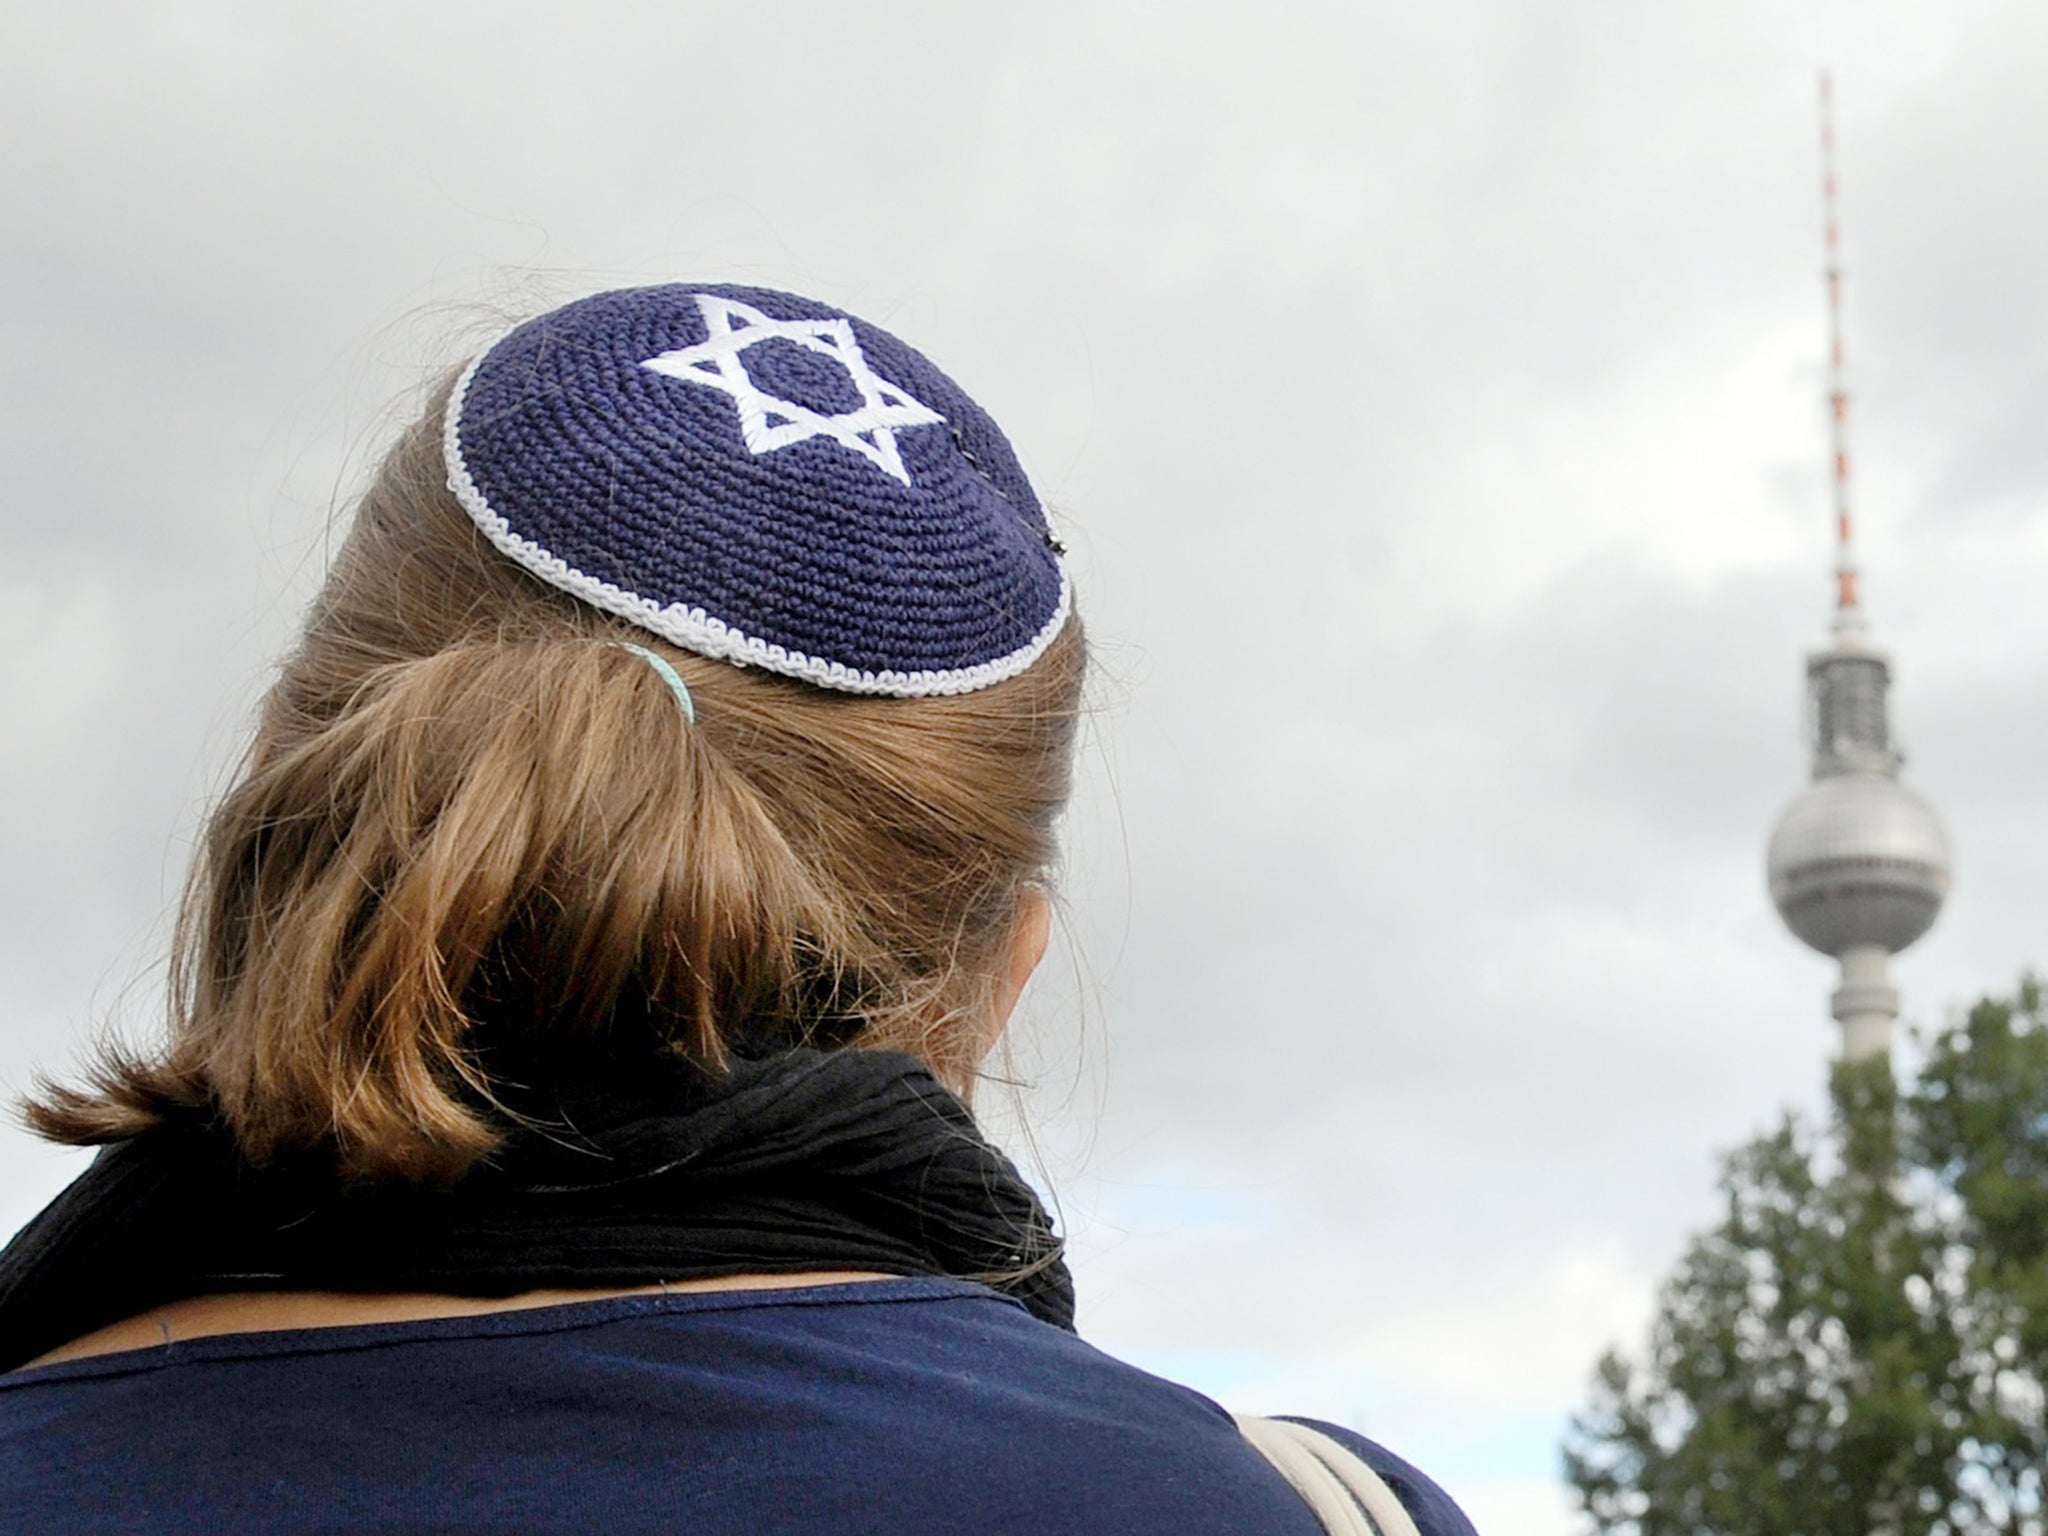 A parent told The Independent that her son is covering his kippah with a baseball cap